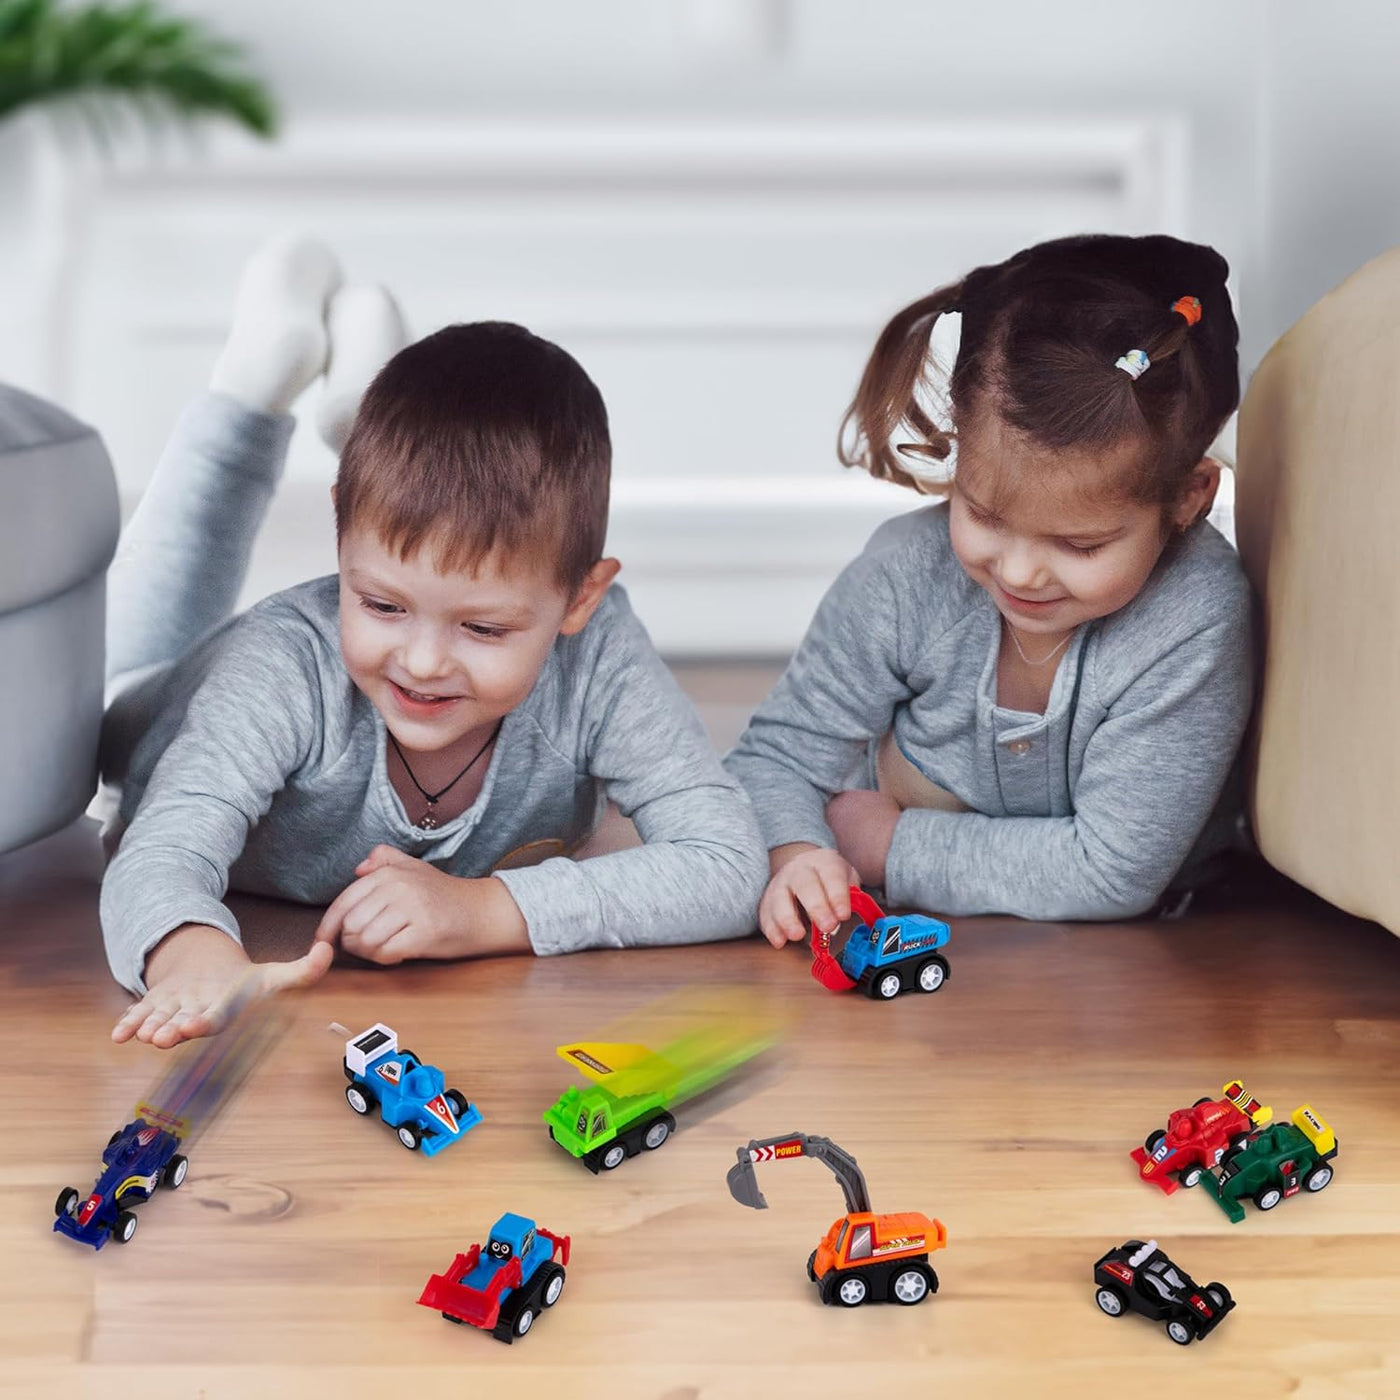 ArtCreativity Mini Pull Back Vehicles (Bulk) - Set of 12 Mini Car and Contruction Trucks - Pull Back Car Toys for Kids with Construction Vehicles and Race Cars - Fun Car Toys for Toddlers